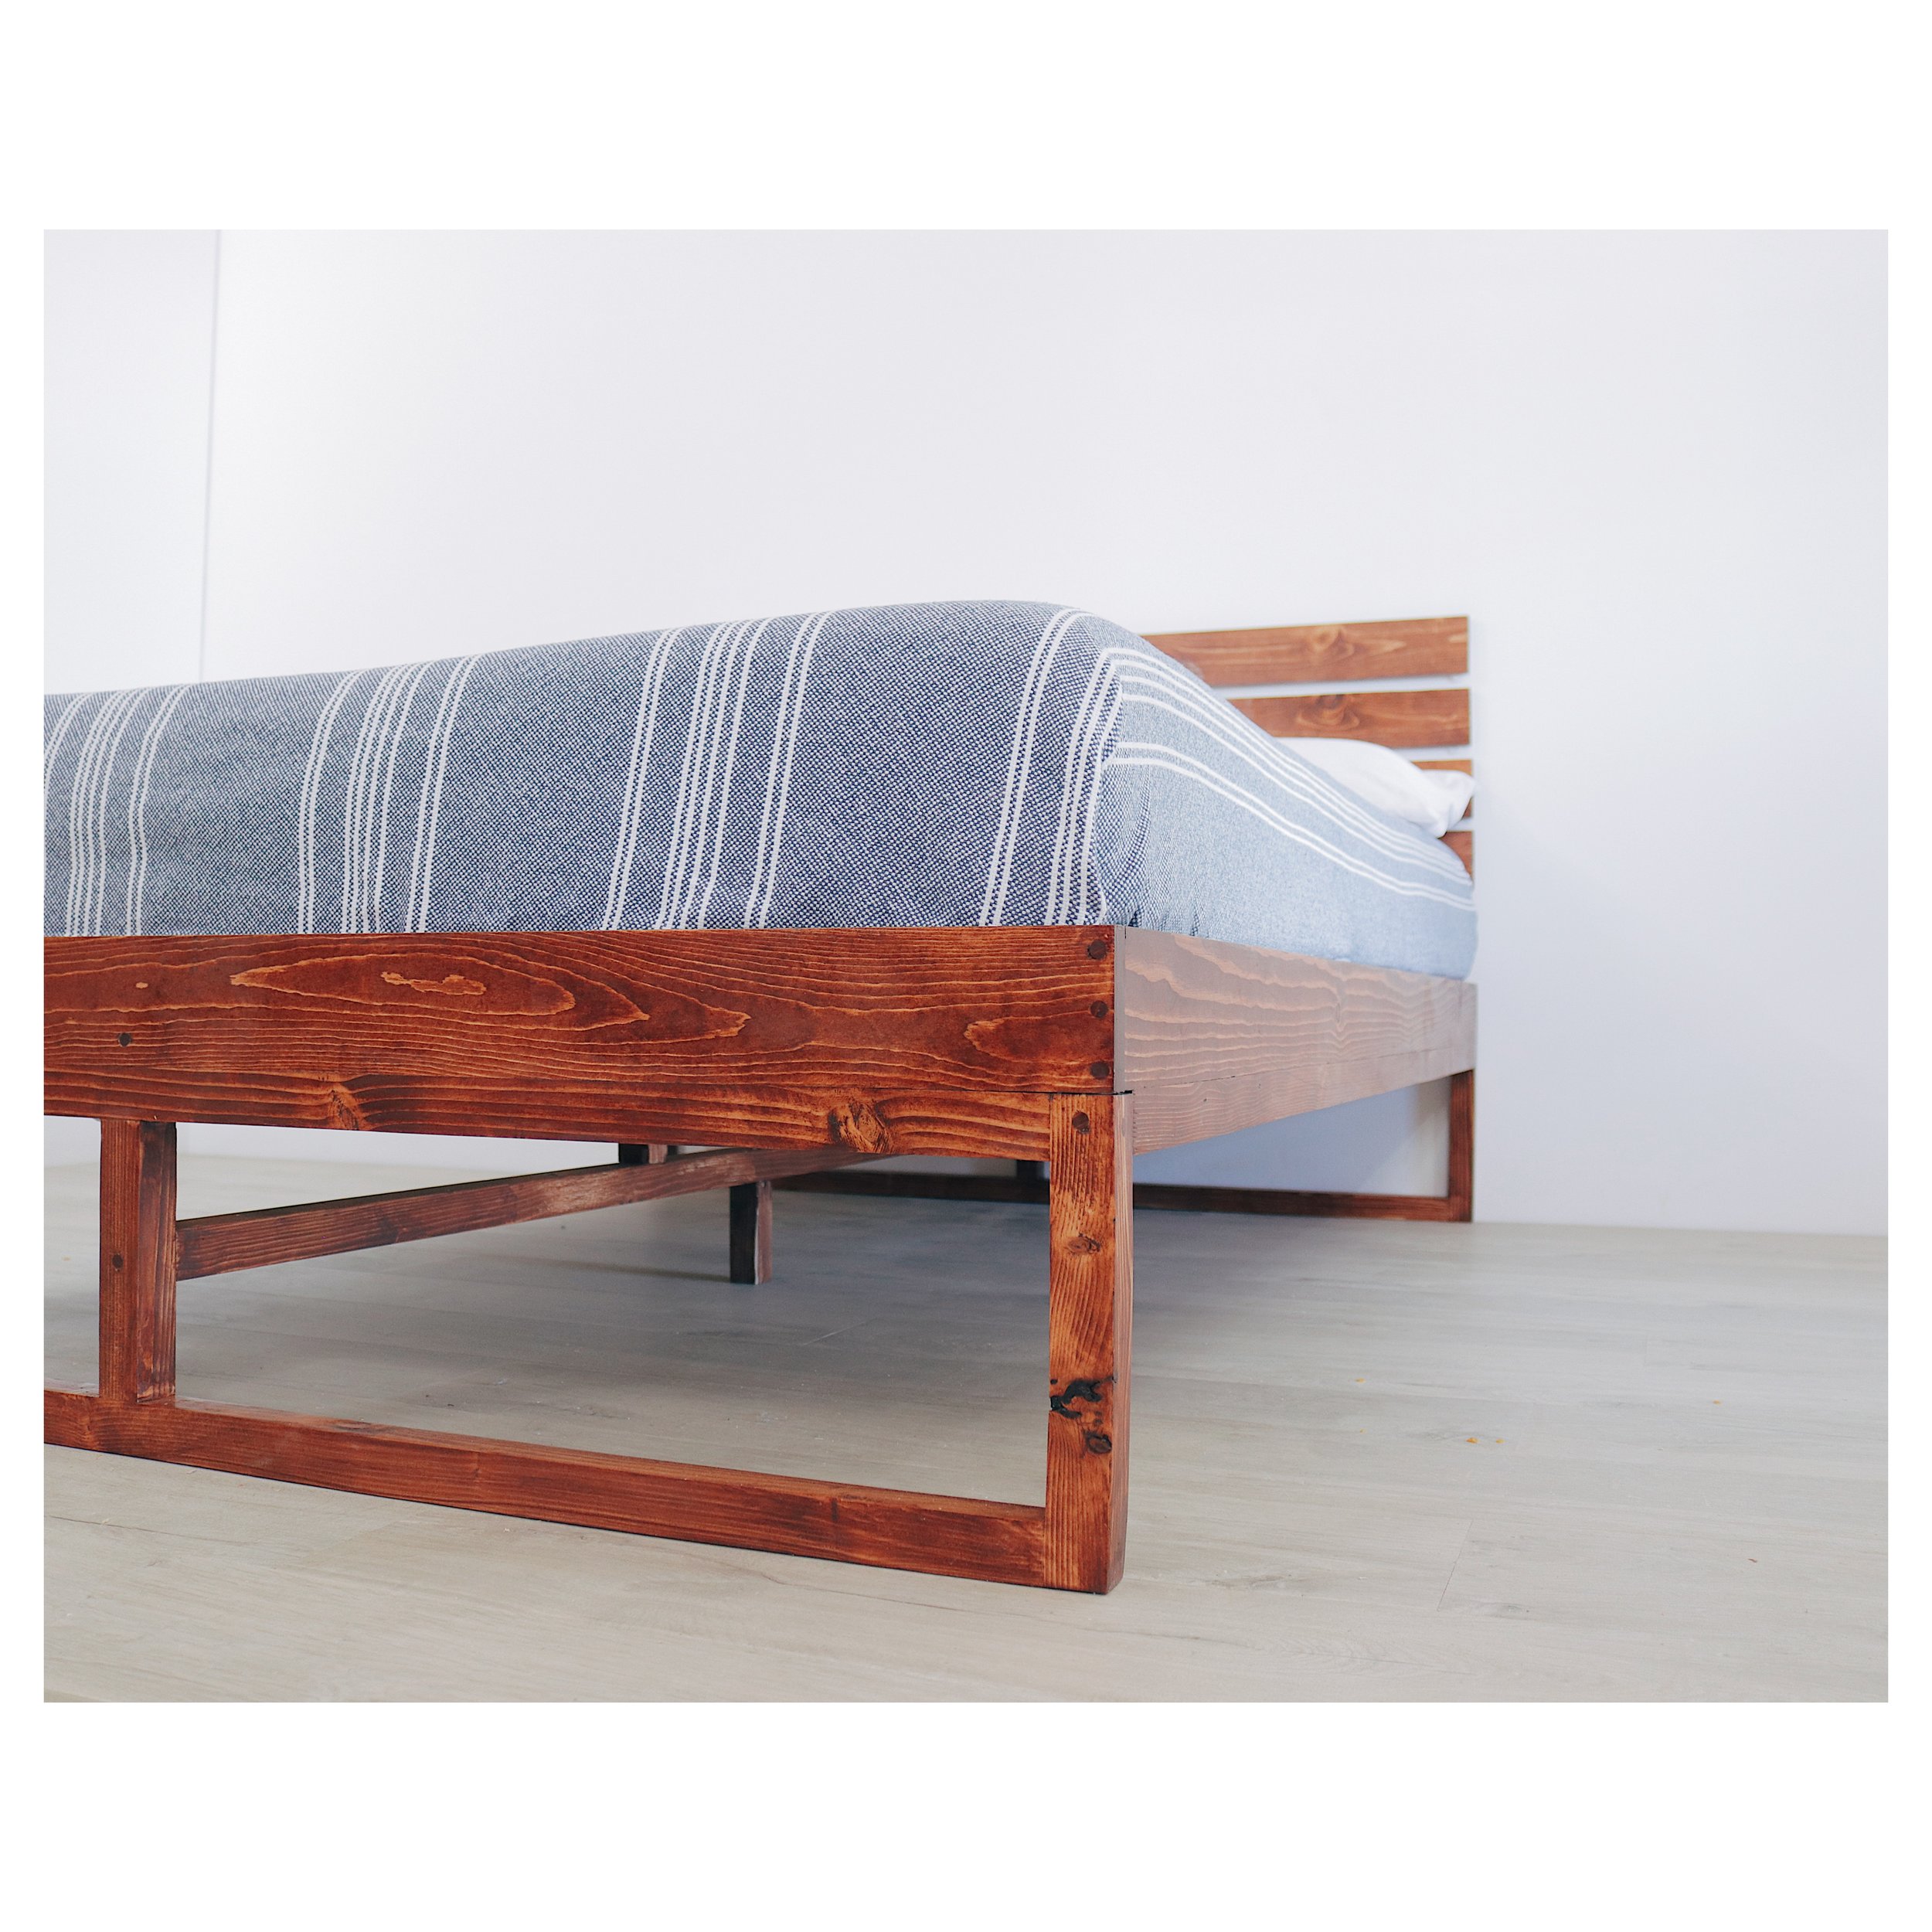  DIY Platform Bed by Mike Montgomery | Modern Builds   